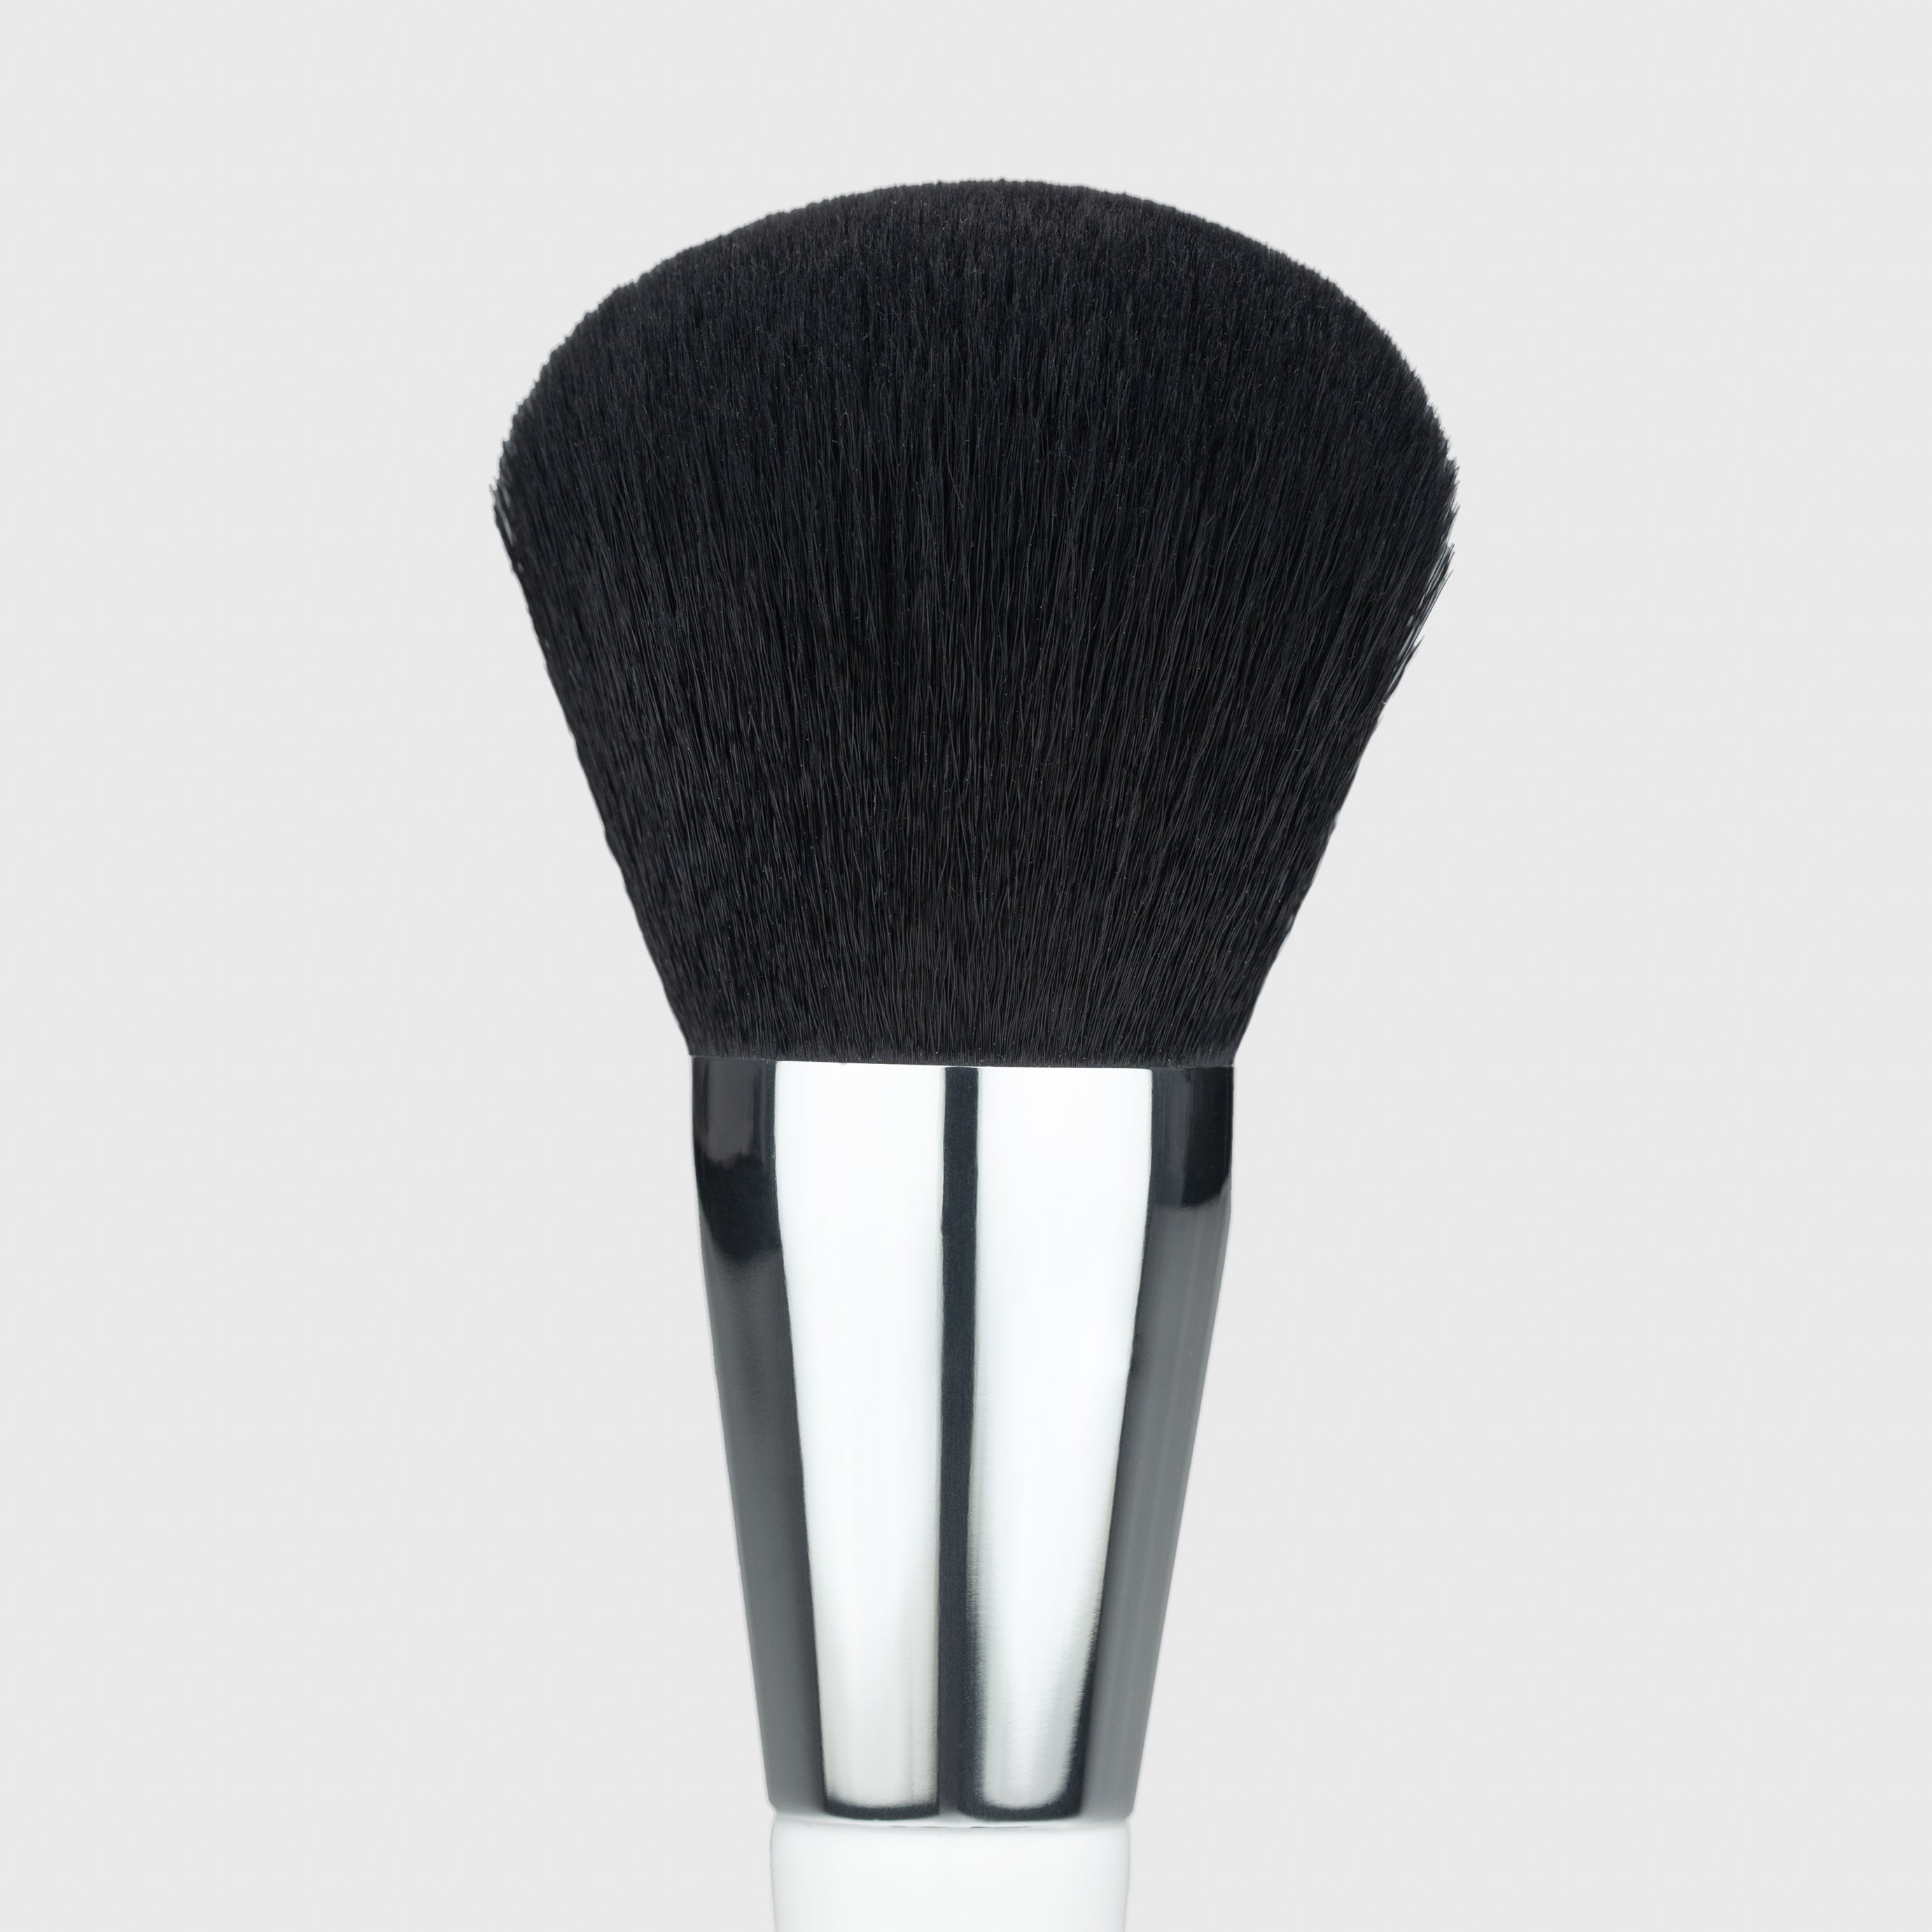 Close up of the large end of the Woosh Beauty complexion dense and fluffy brush 